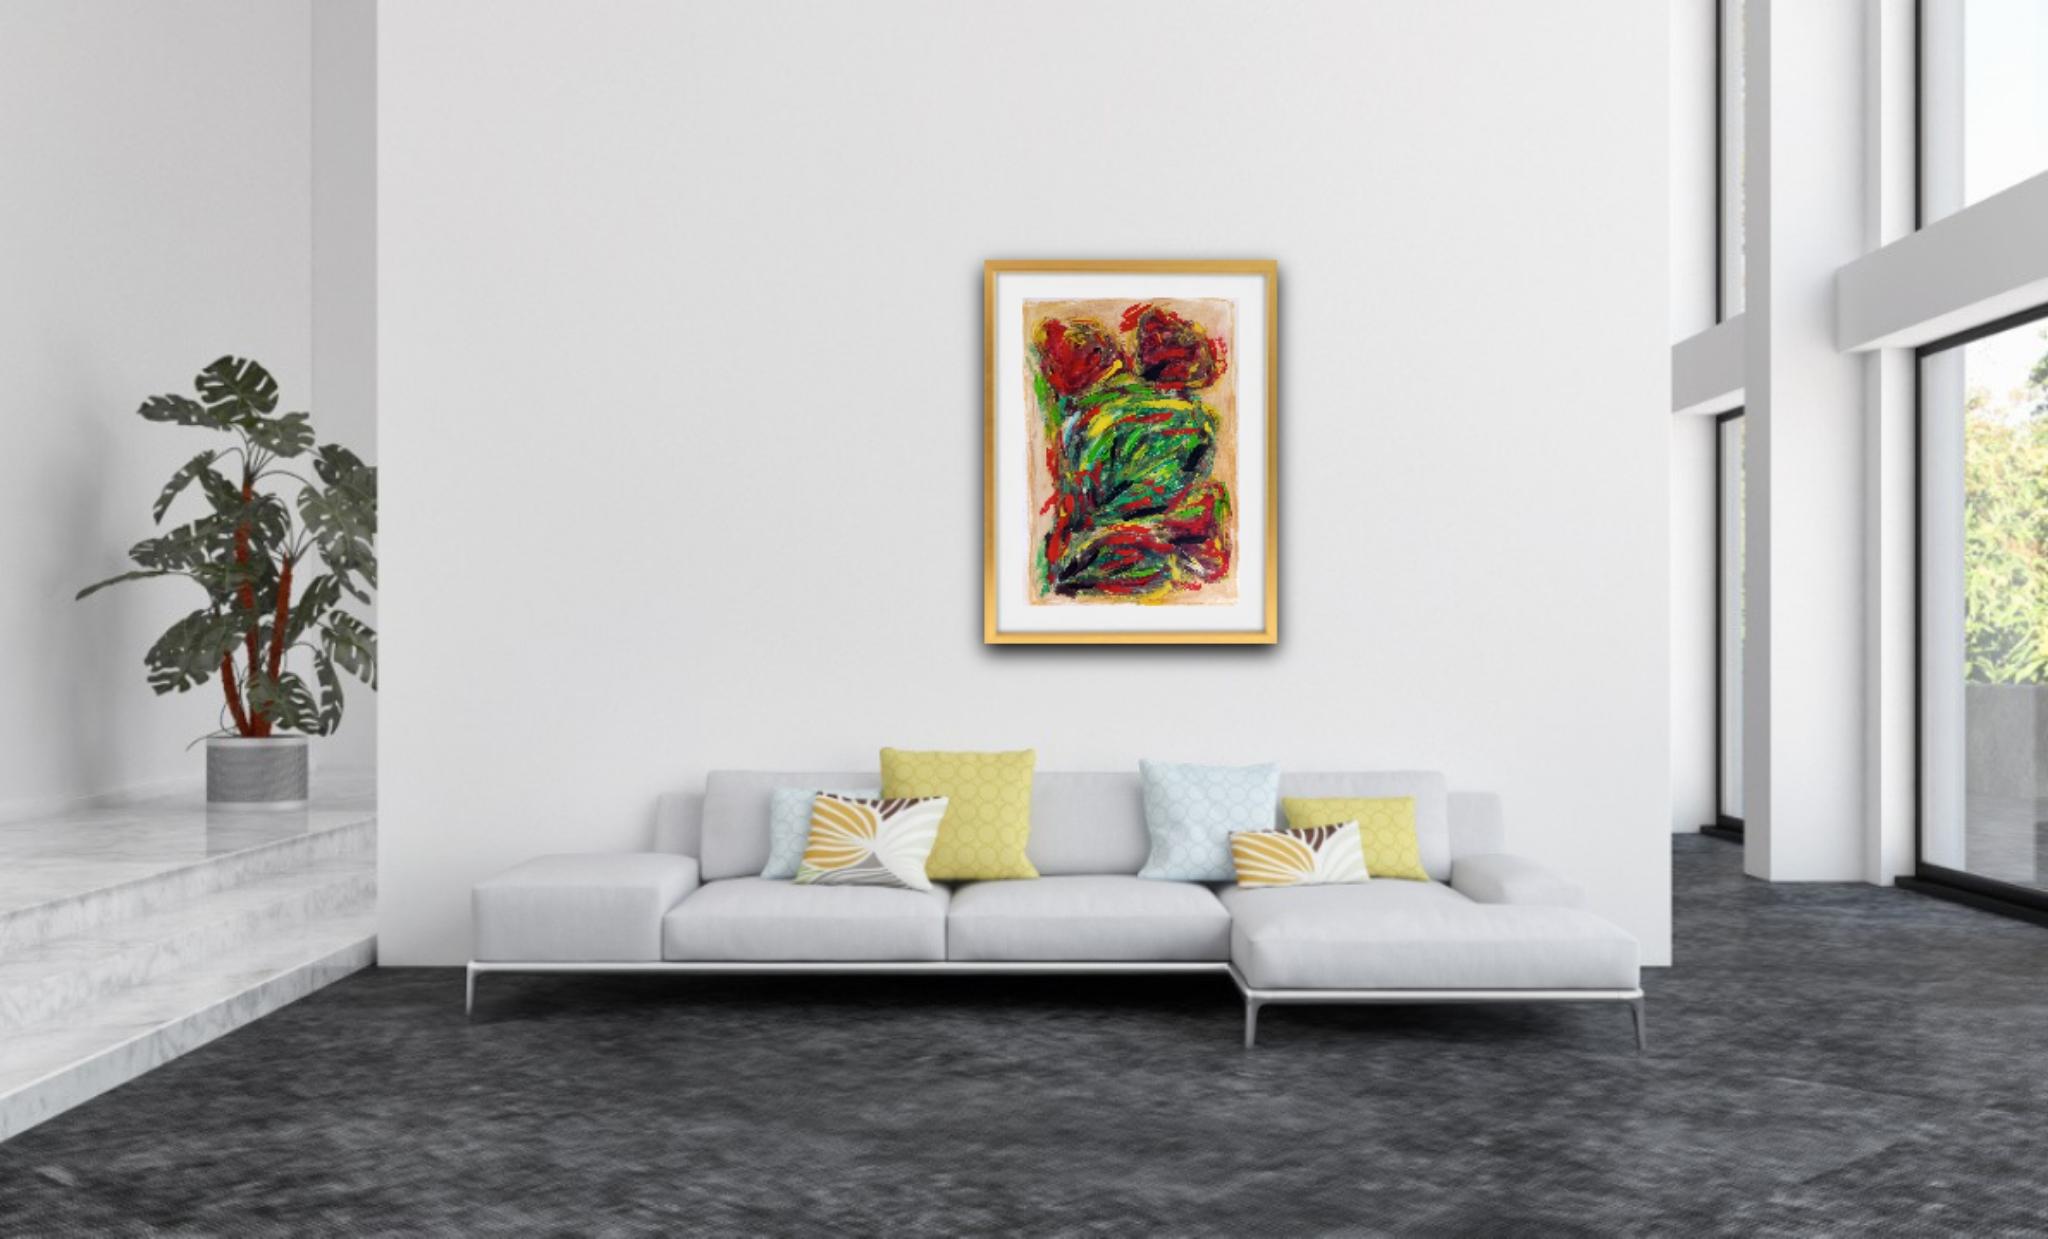 
This expressive vibrant abstract floral painting is called 